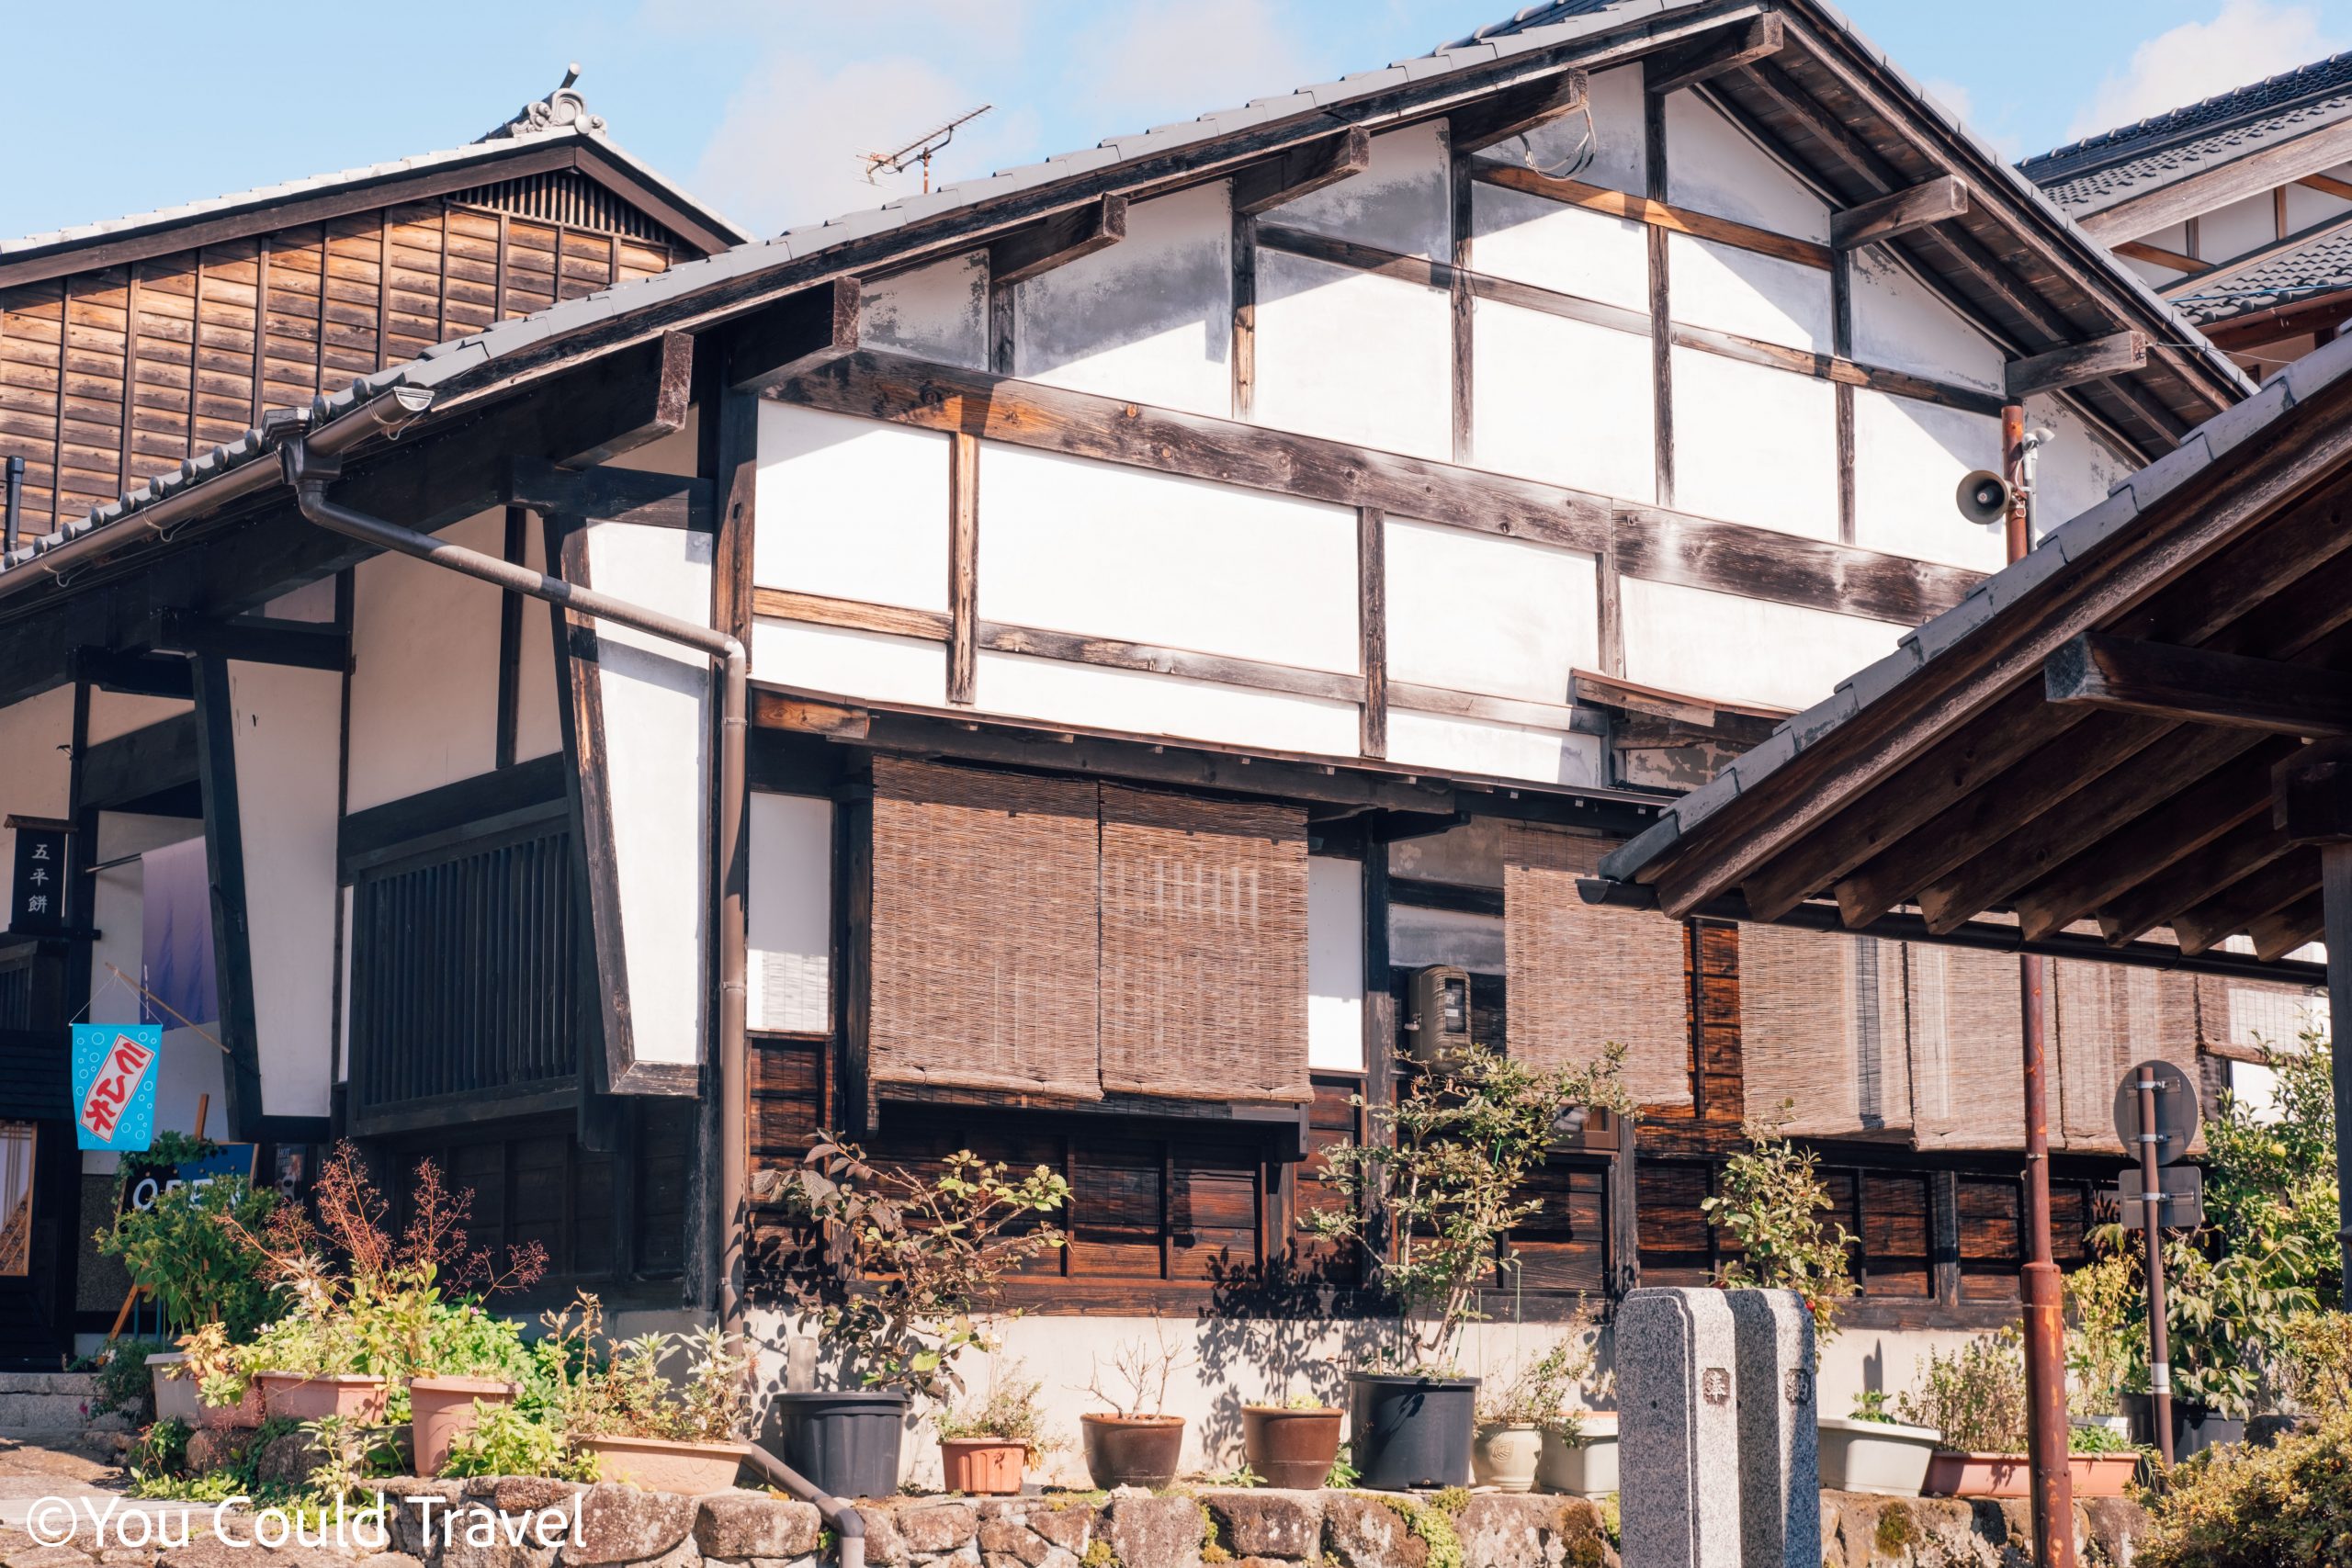 Where to stay in Magome Japan